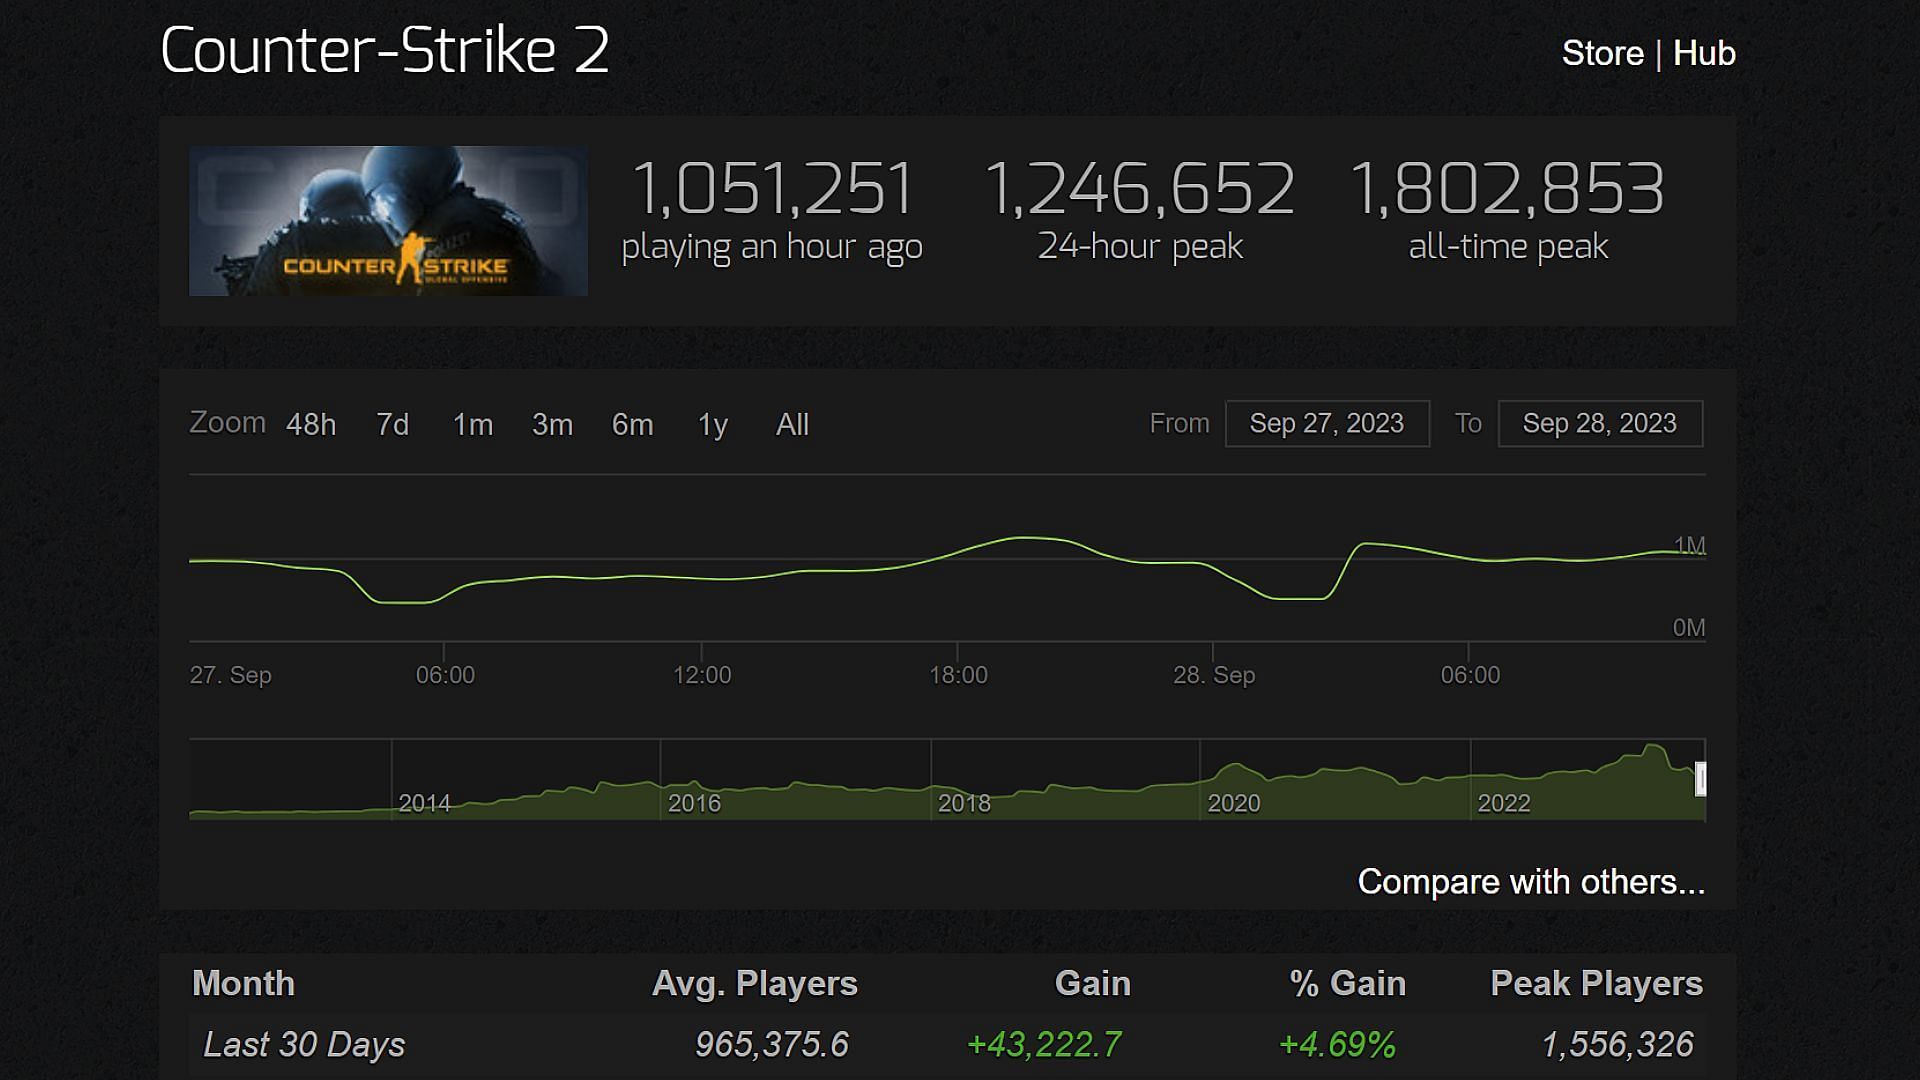 CS2 player count: Counter-Strike 2 immediately reaches a peak of 1.24 million players hours after release